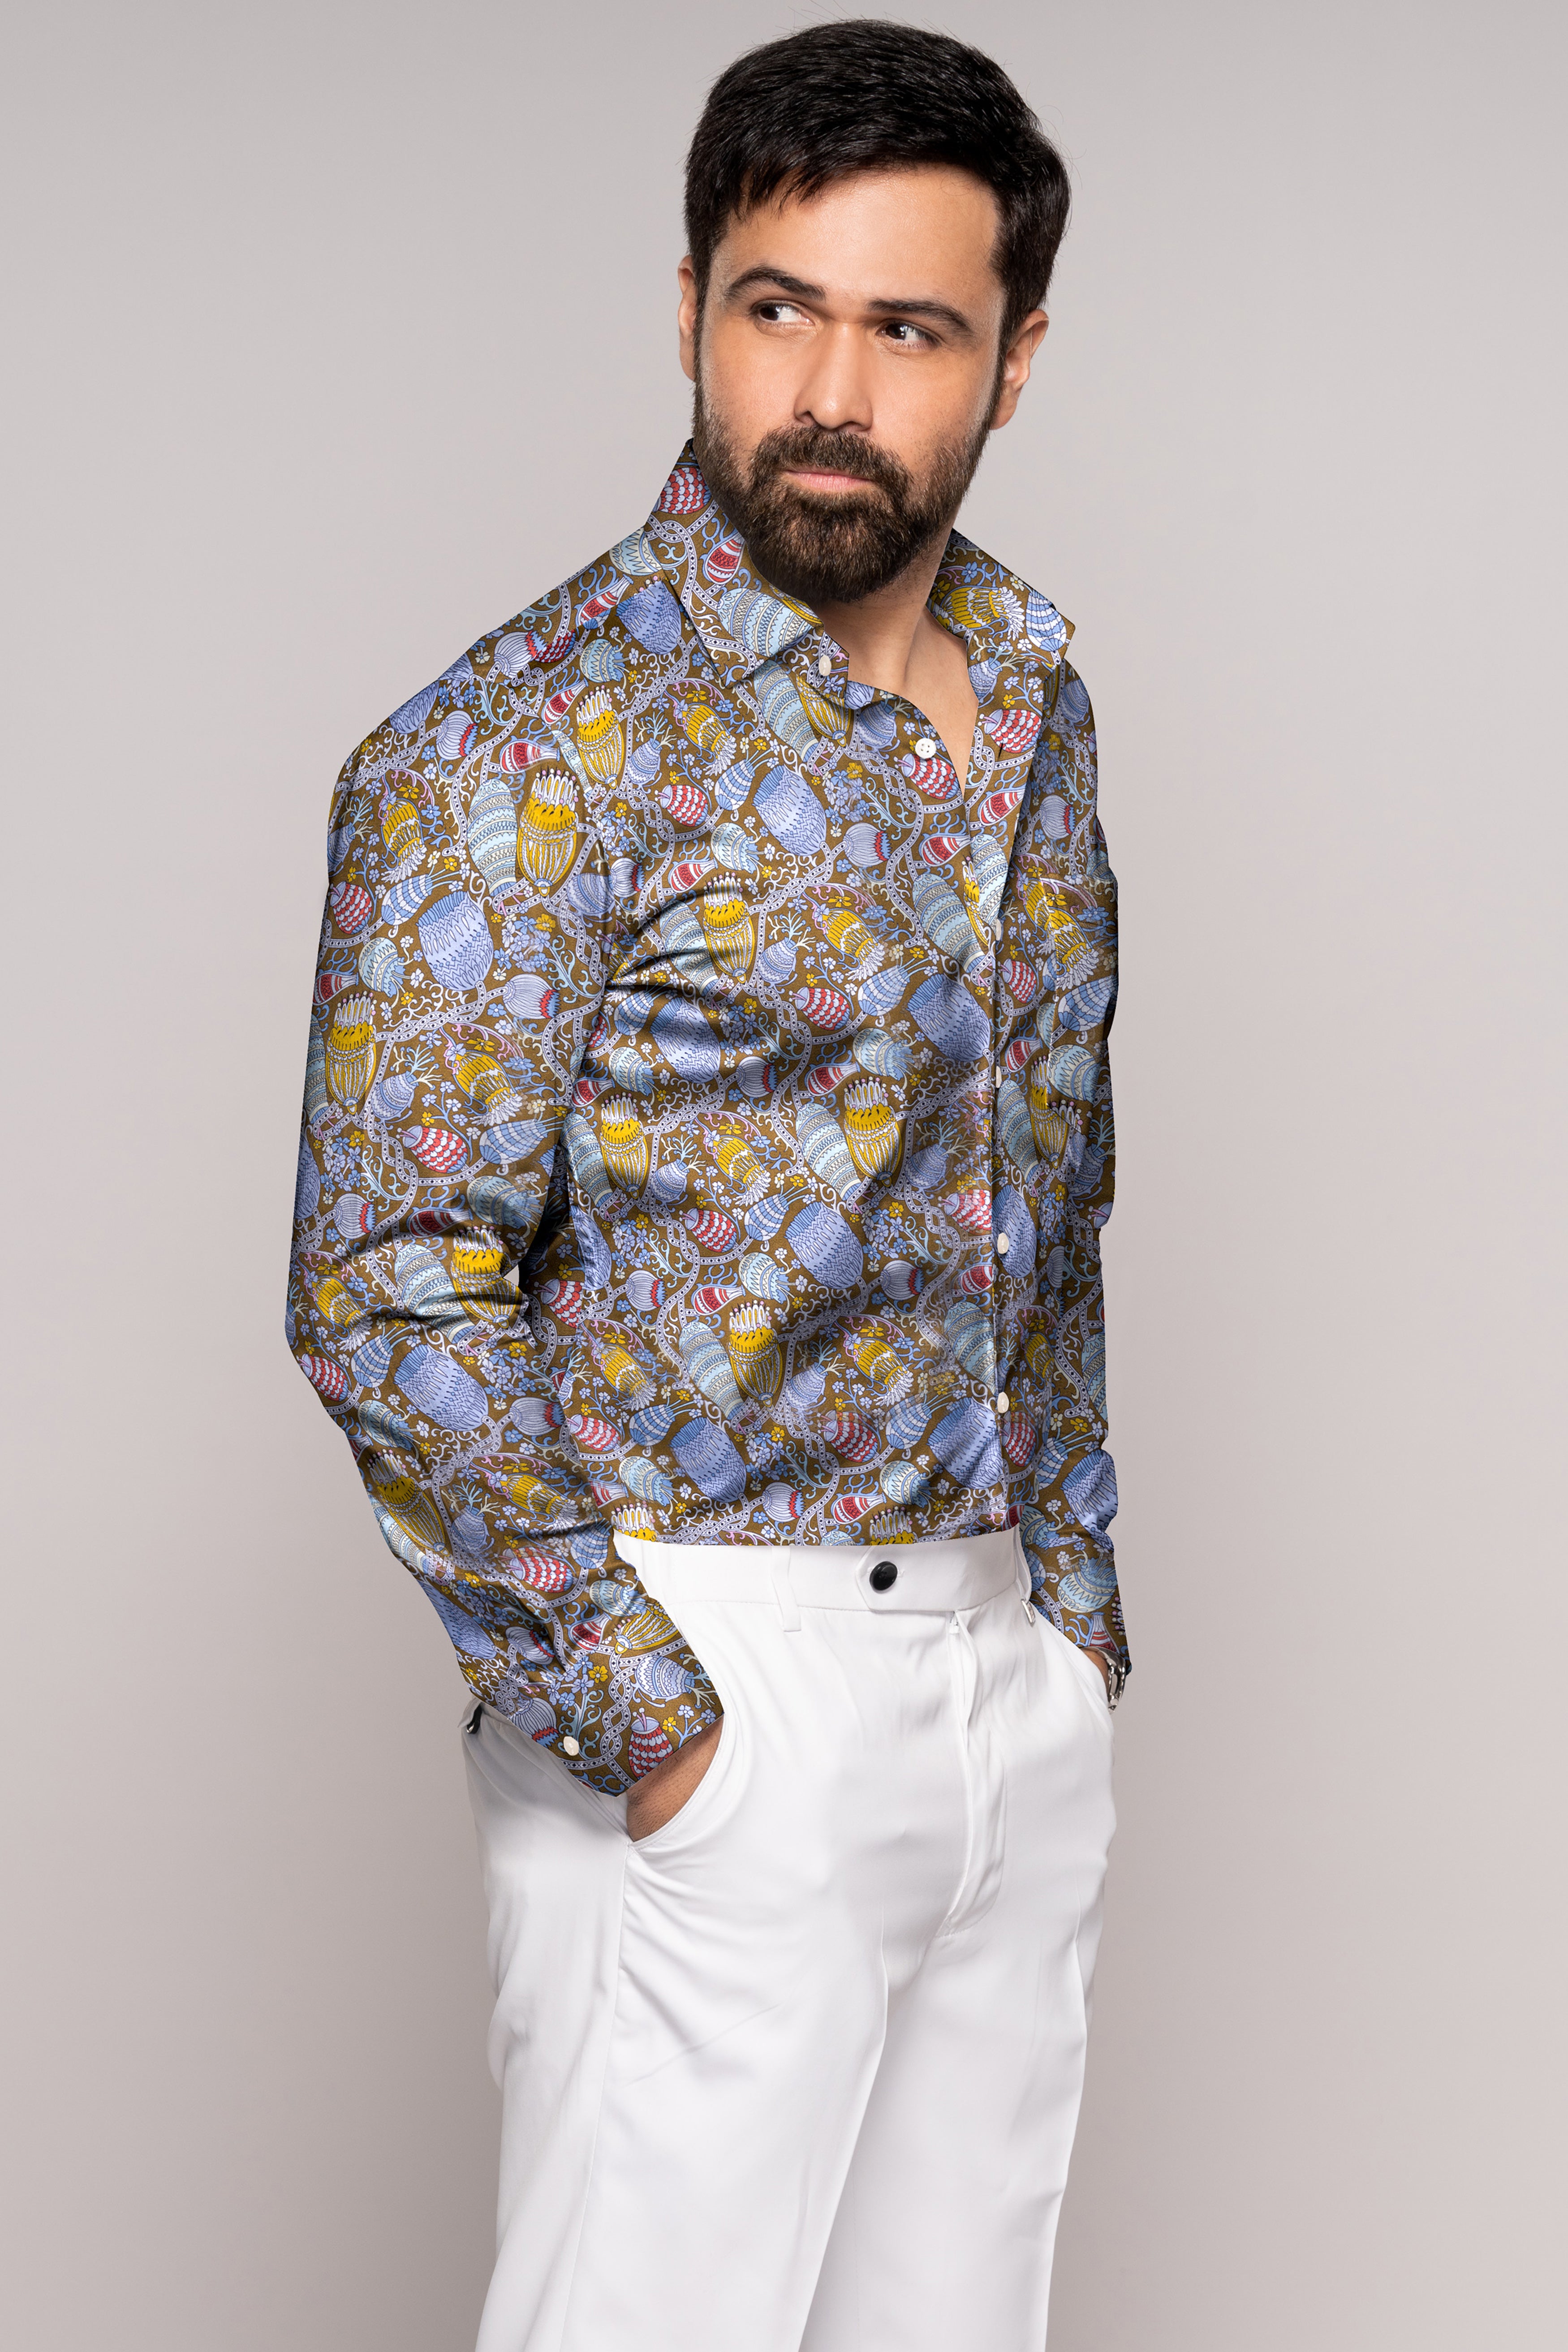 Nutmeg Brown with Iris Blue and Cadet Red Floral Printed Subtle Sheen Super Soft Premium Cotton Shirt